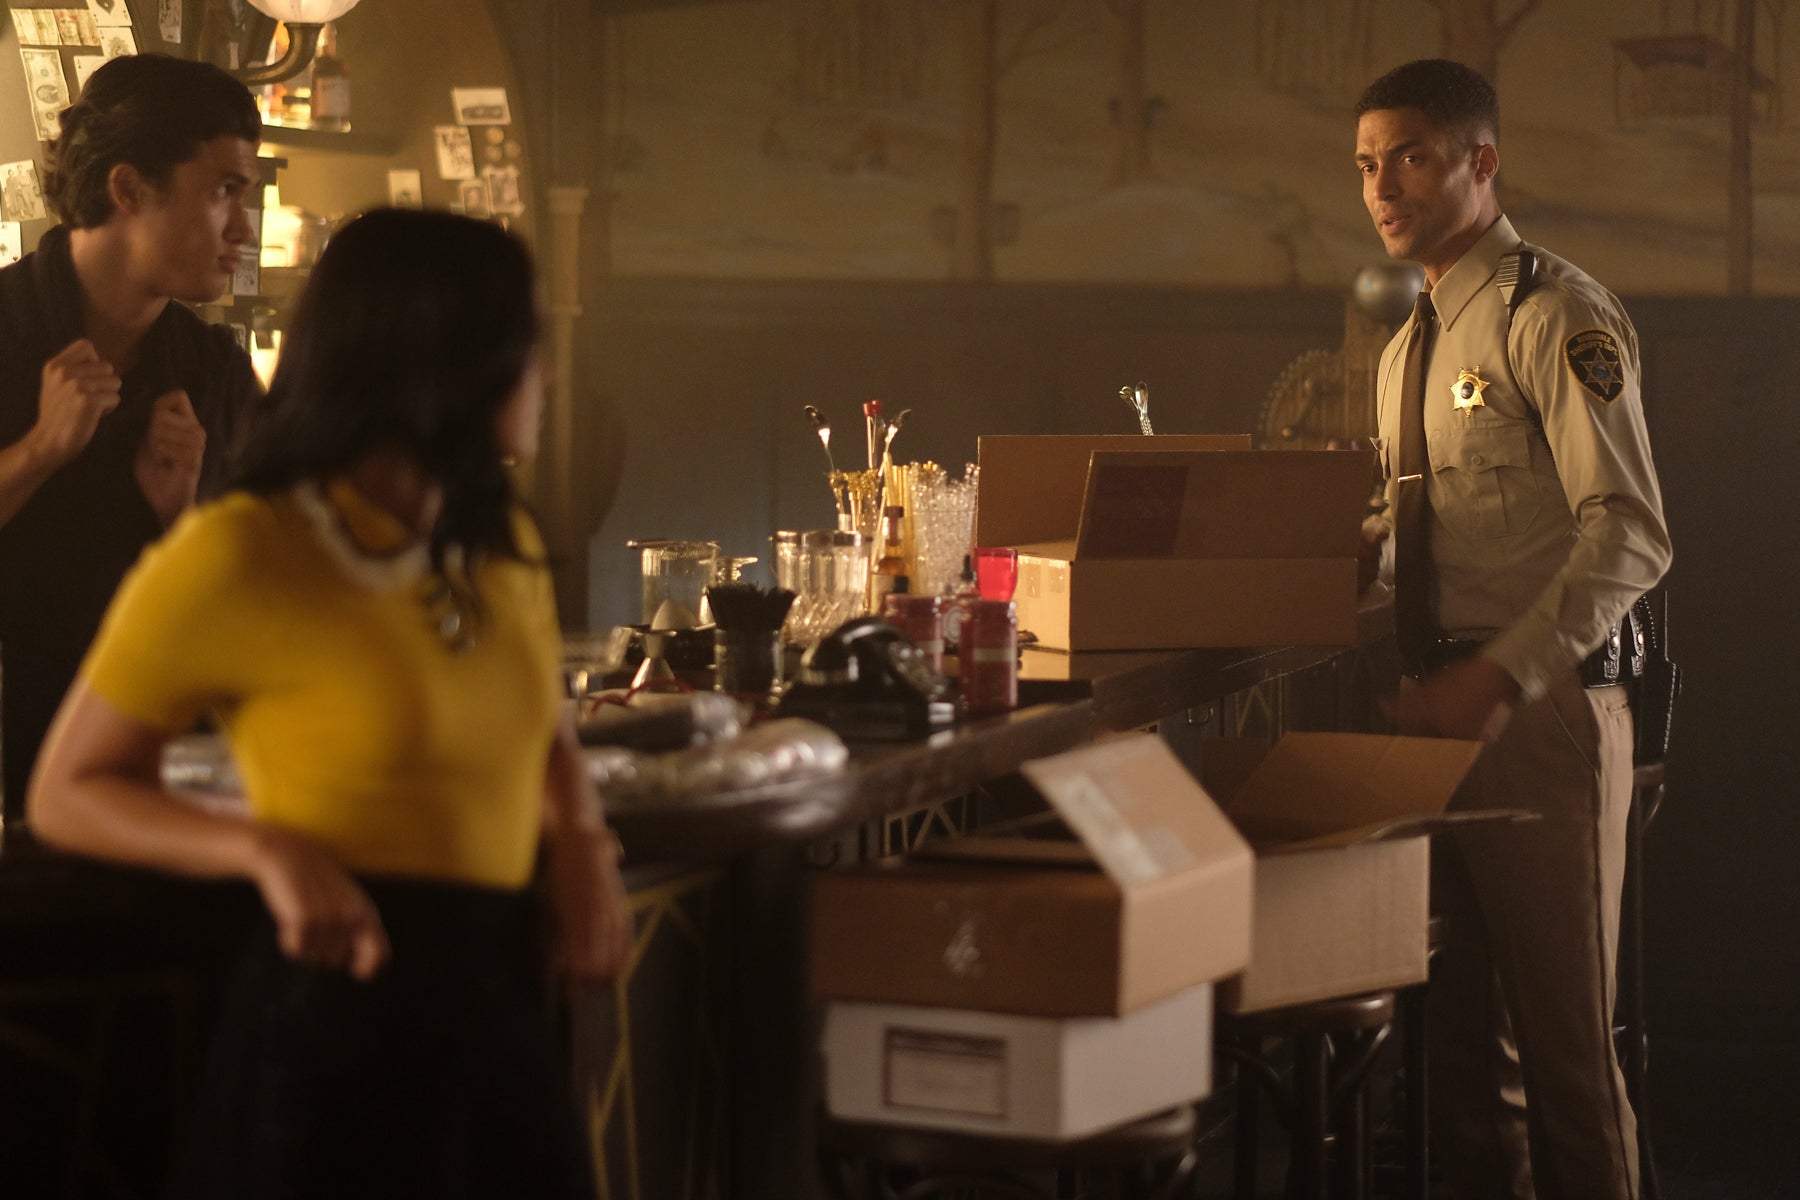 In the speakeasy, Reggie Mantle and Veronica Lodge look on as Sheriff Minetta looks through boxes on the bar.